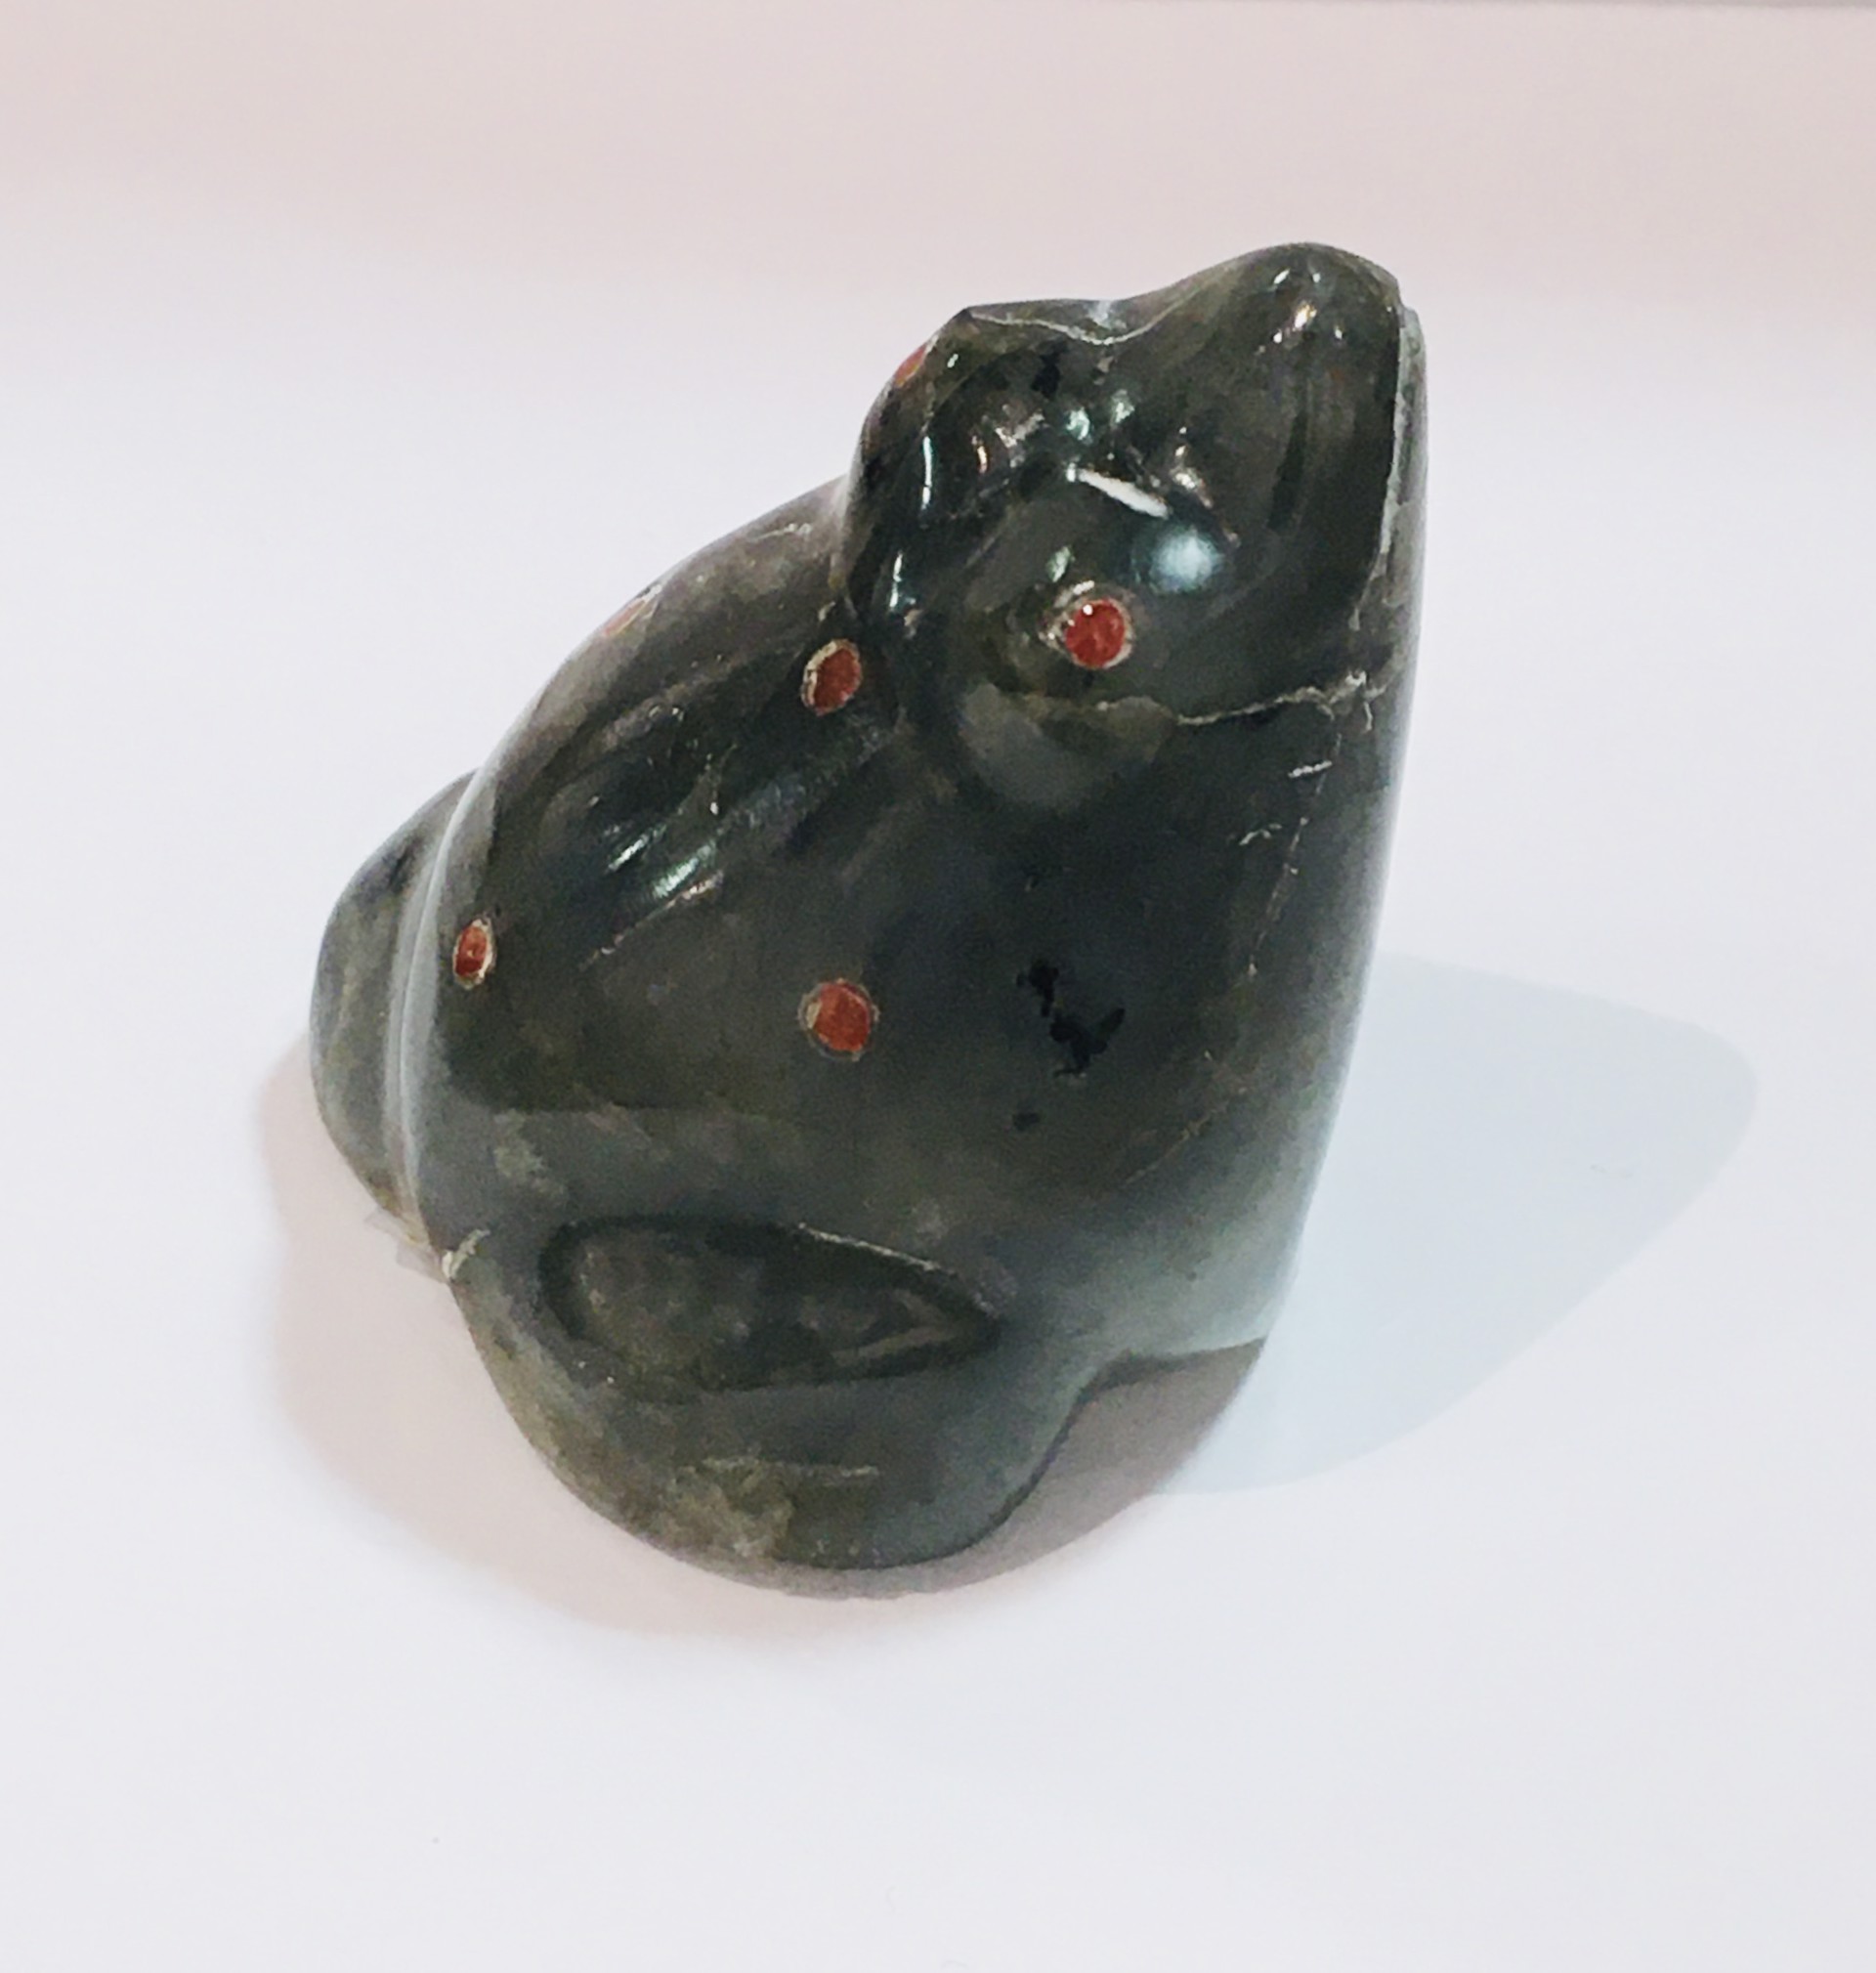 Frog with Embedded Red Spots by Zuni Fetish